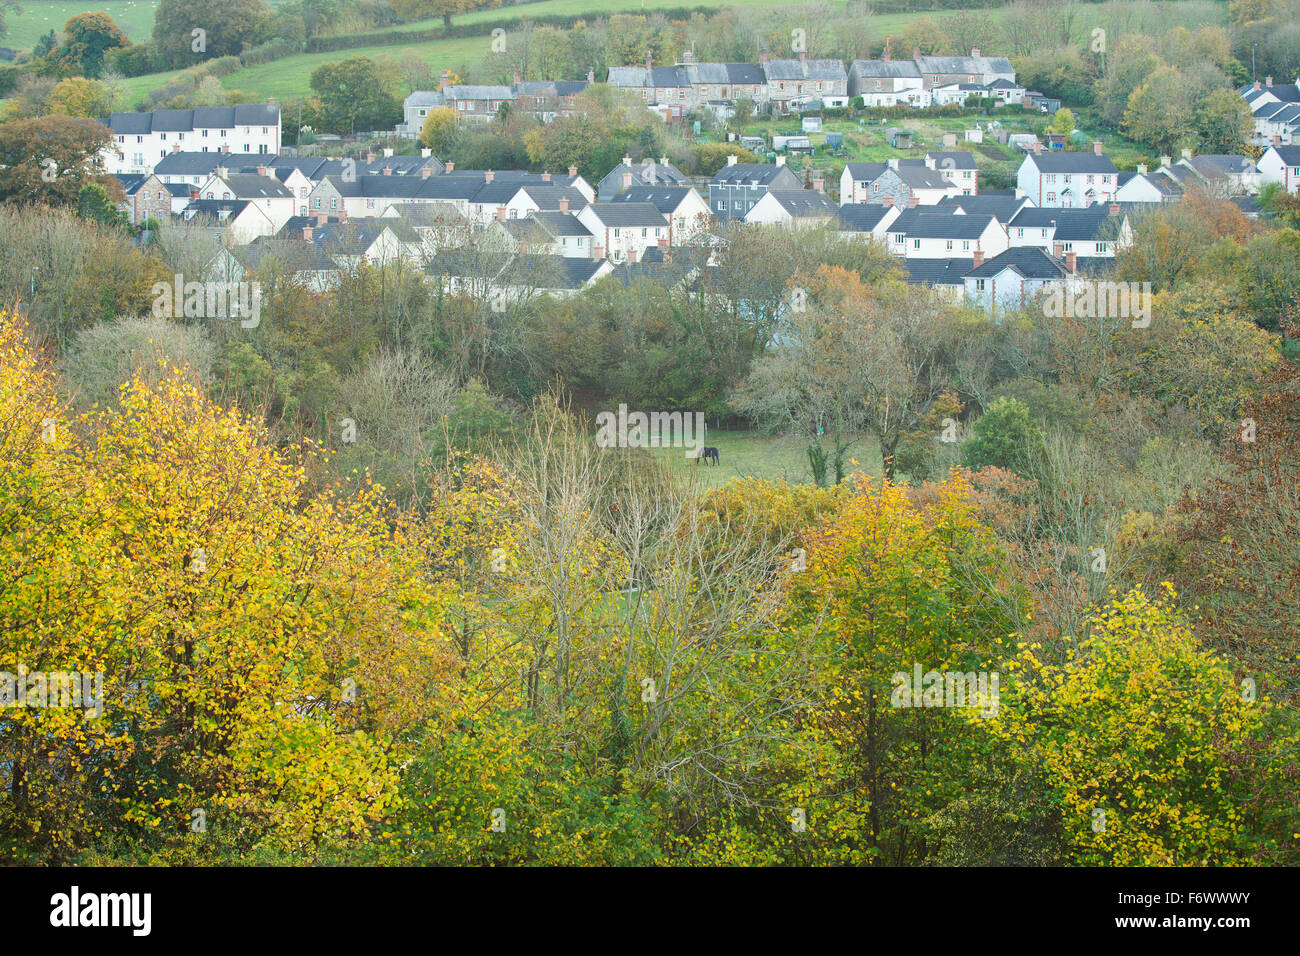 A new housing estate build in a rural area Stock Photo